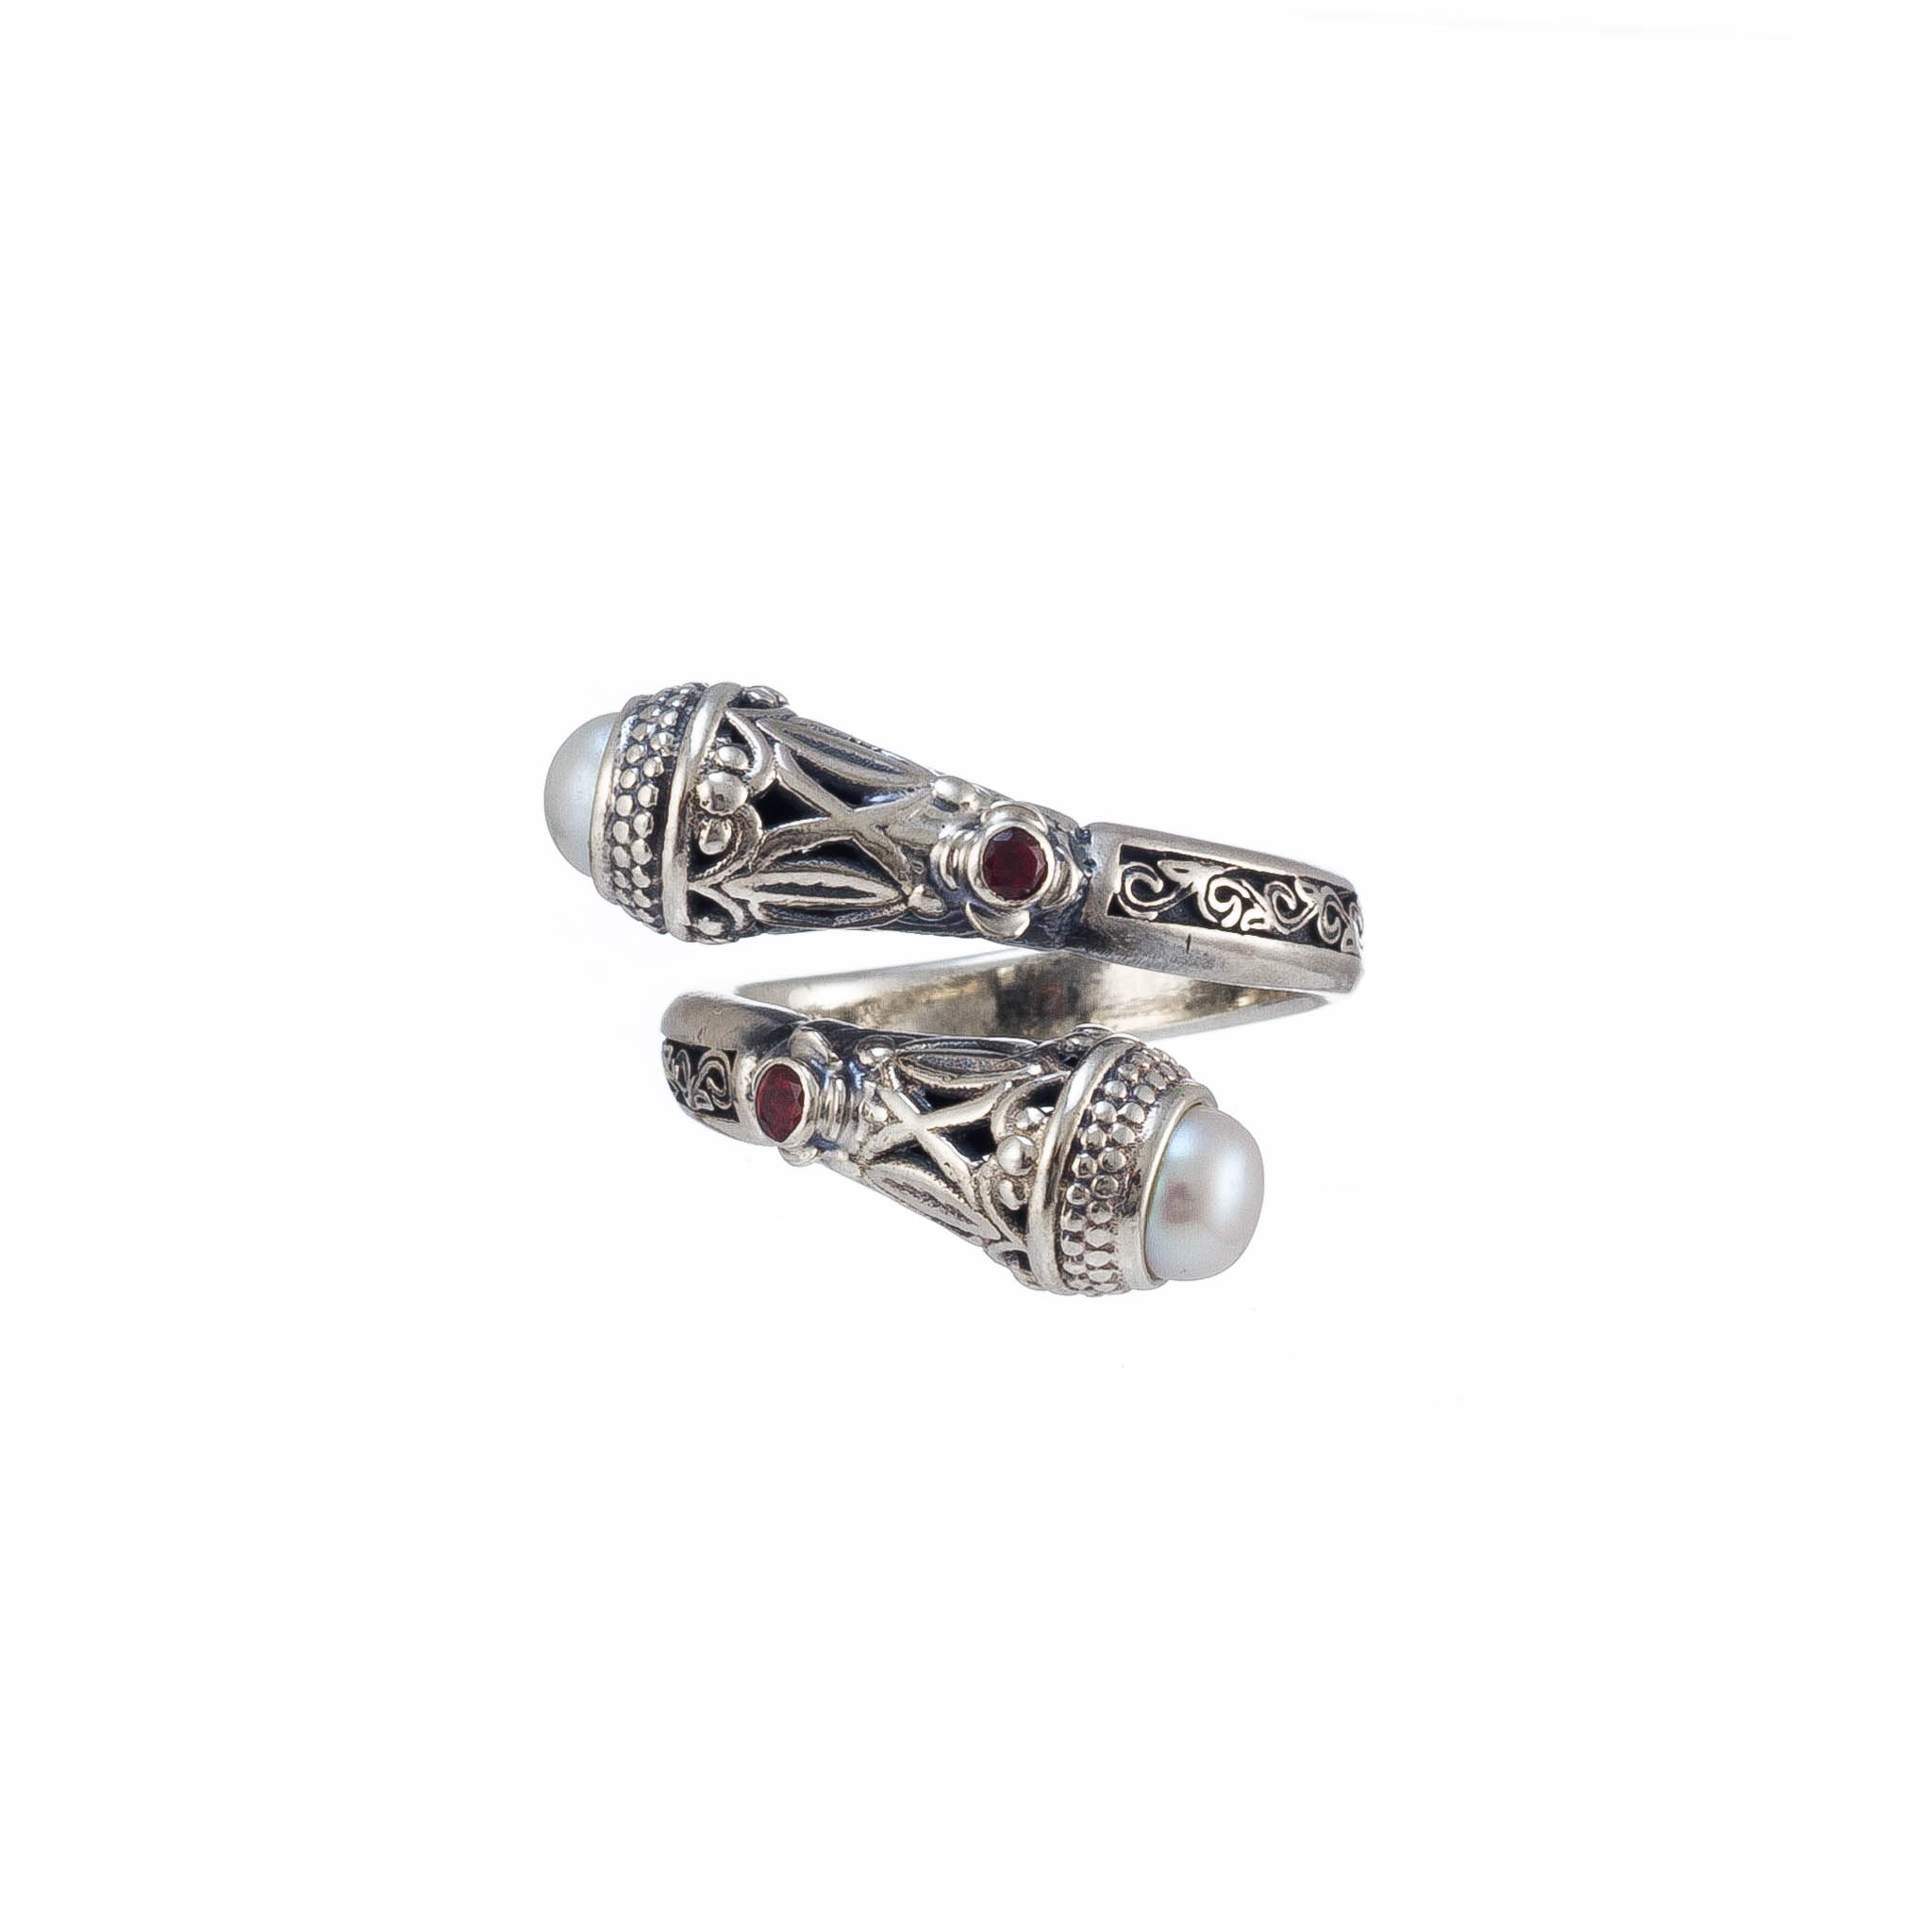 Santorini double ring in sterling silver with pearls